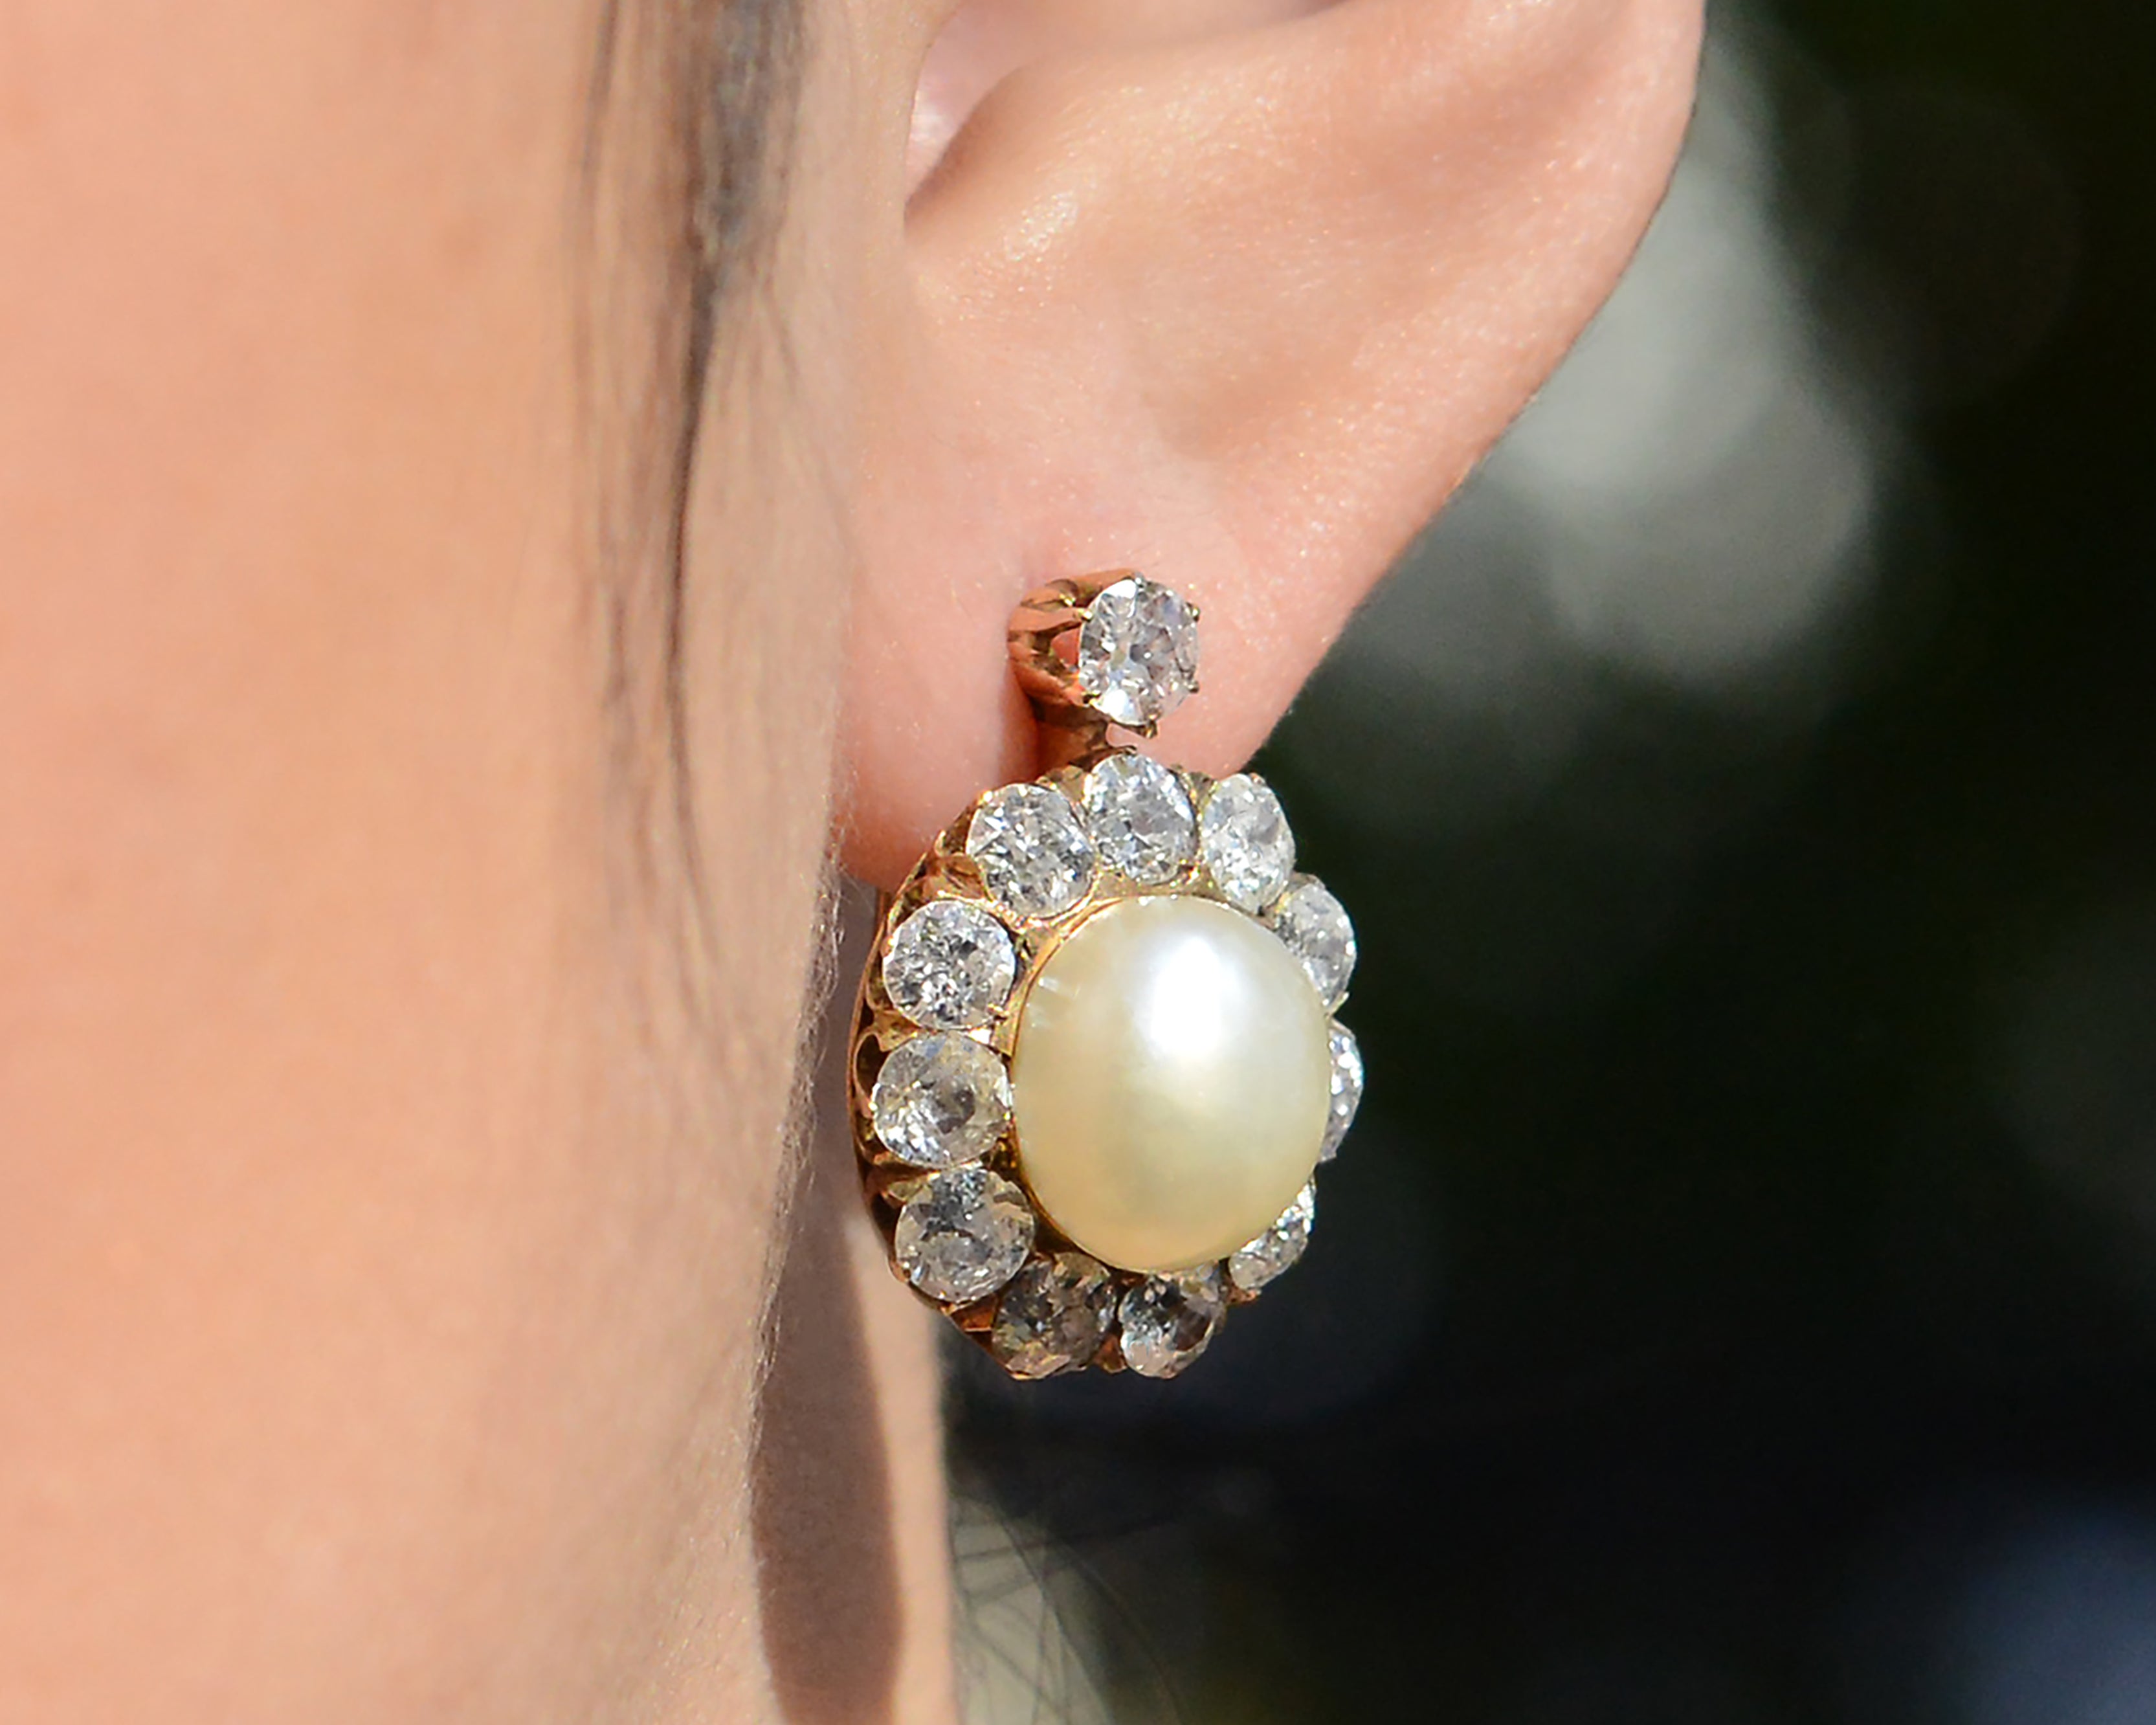 GIA Certified Natural Pearl Victorian Antique Diamond Earrings